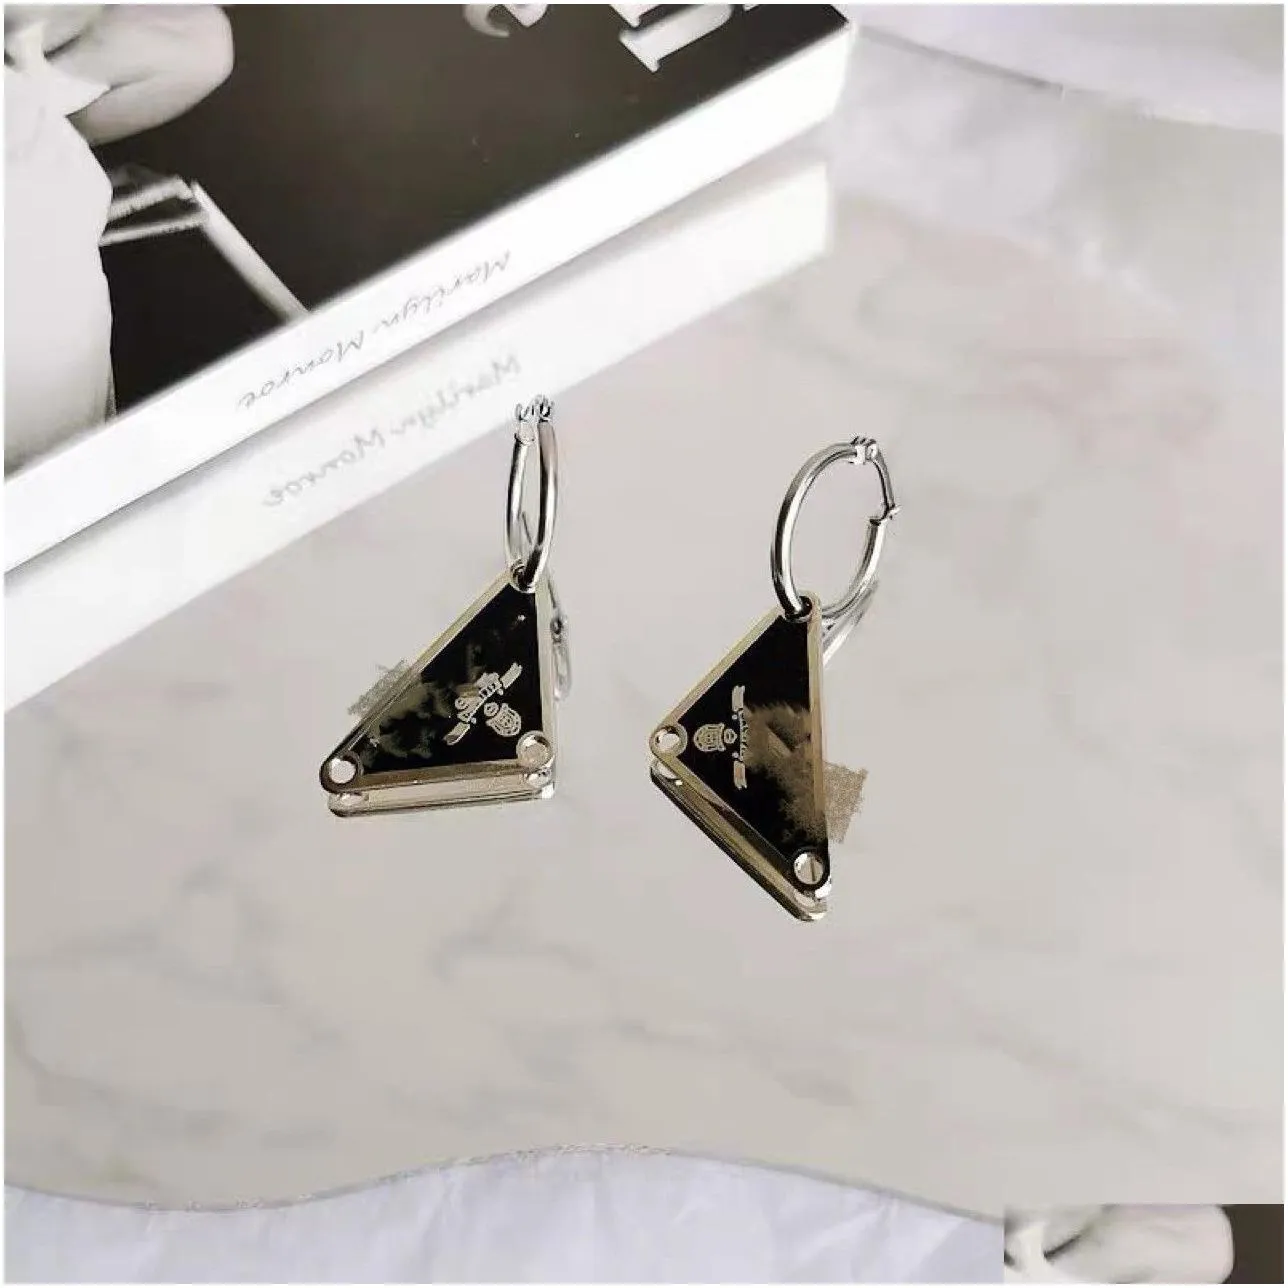 famous design triangle earrings mens earring hoop women triangle earings black and white party jewelry ornaments simple elegant